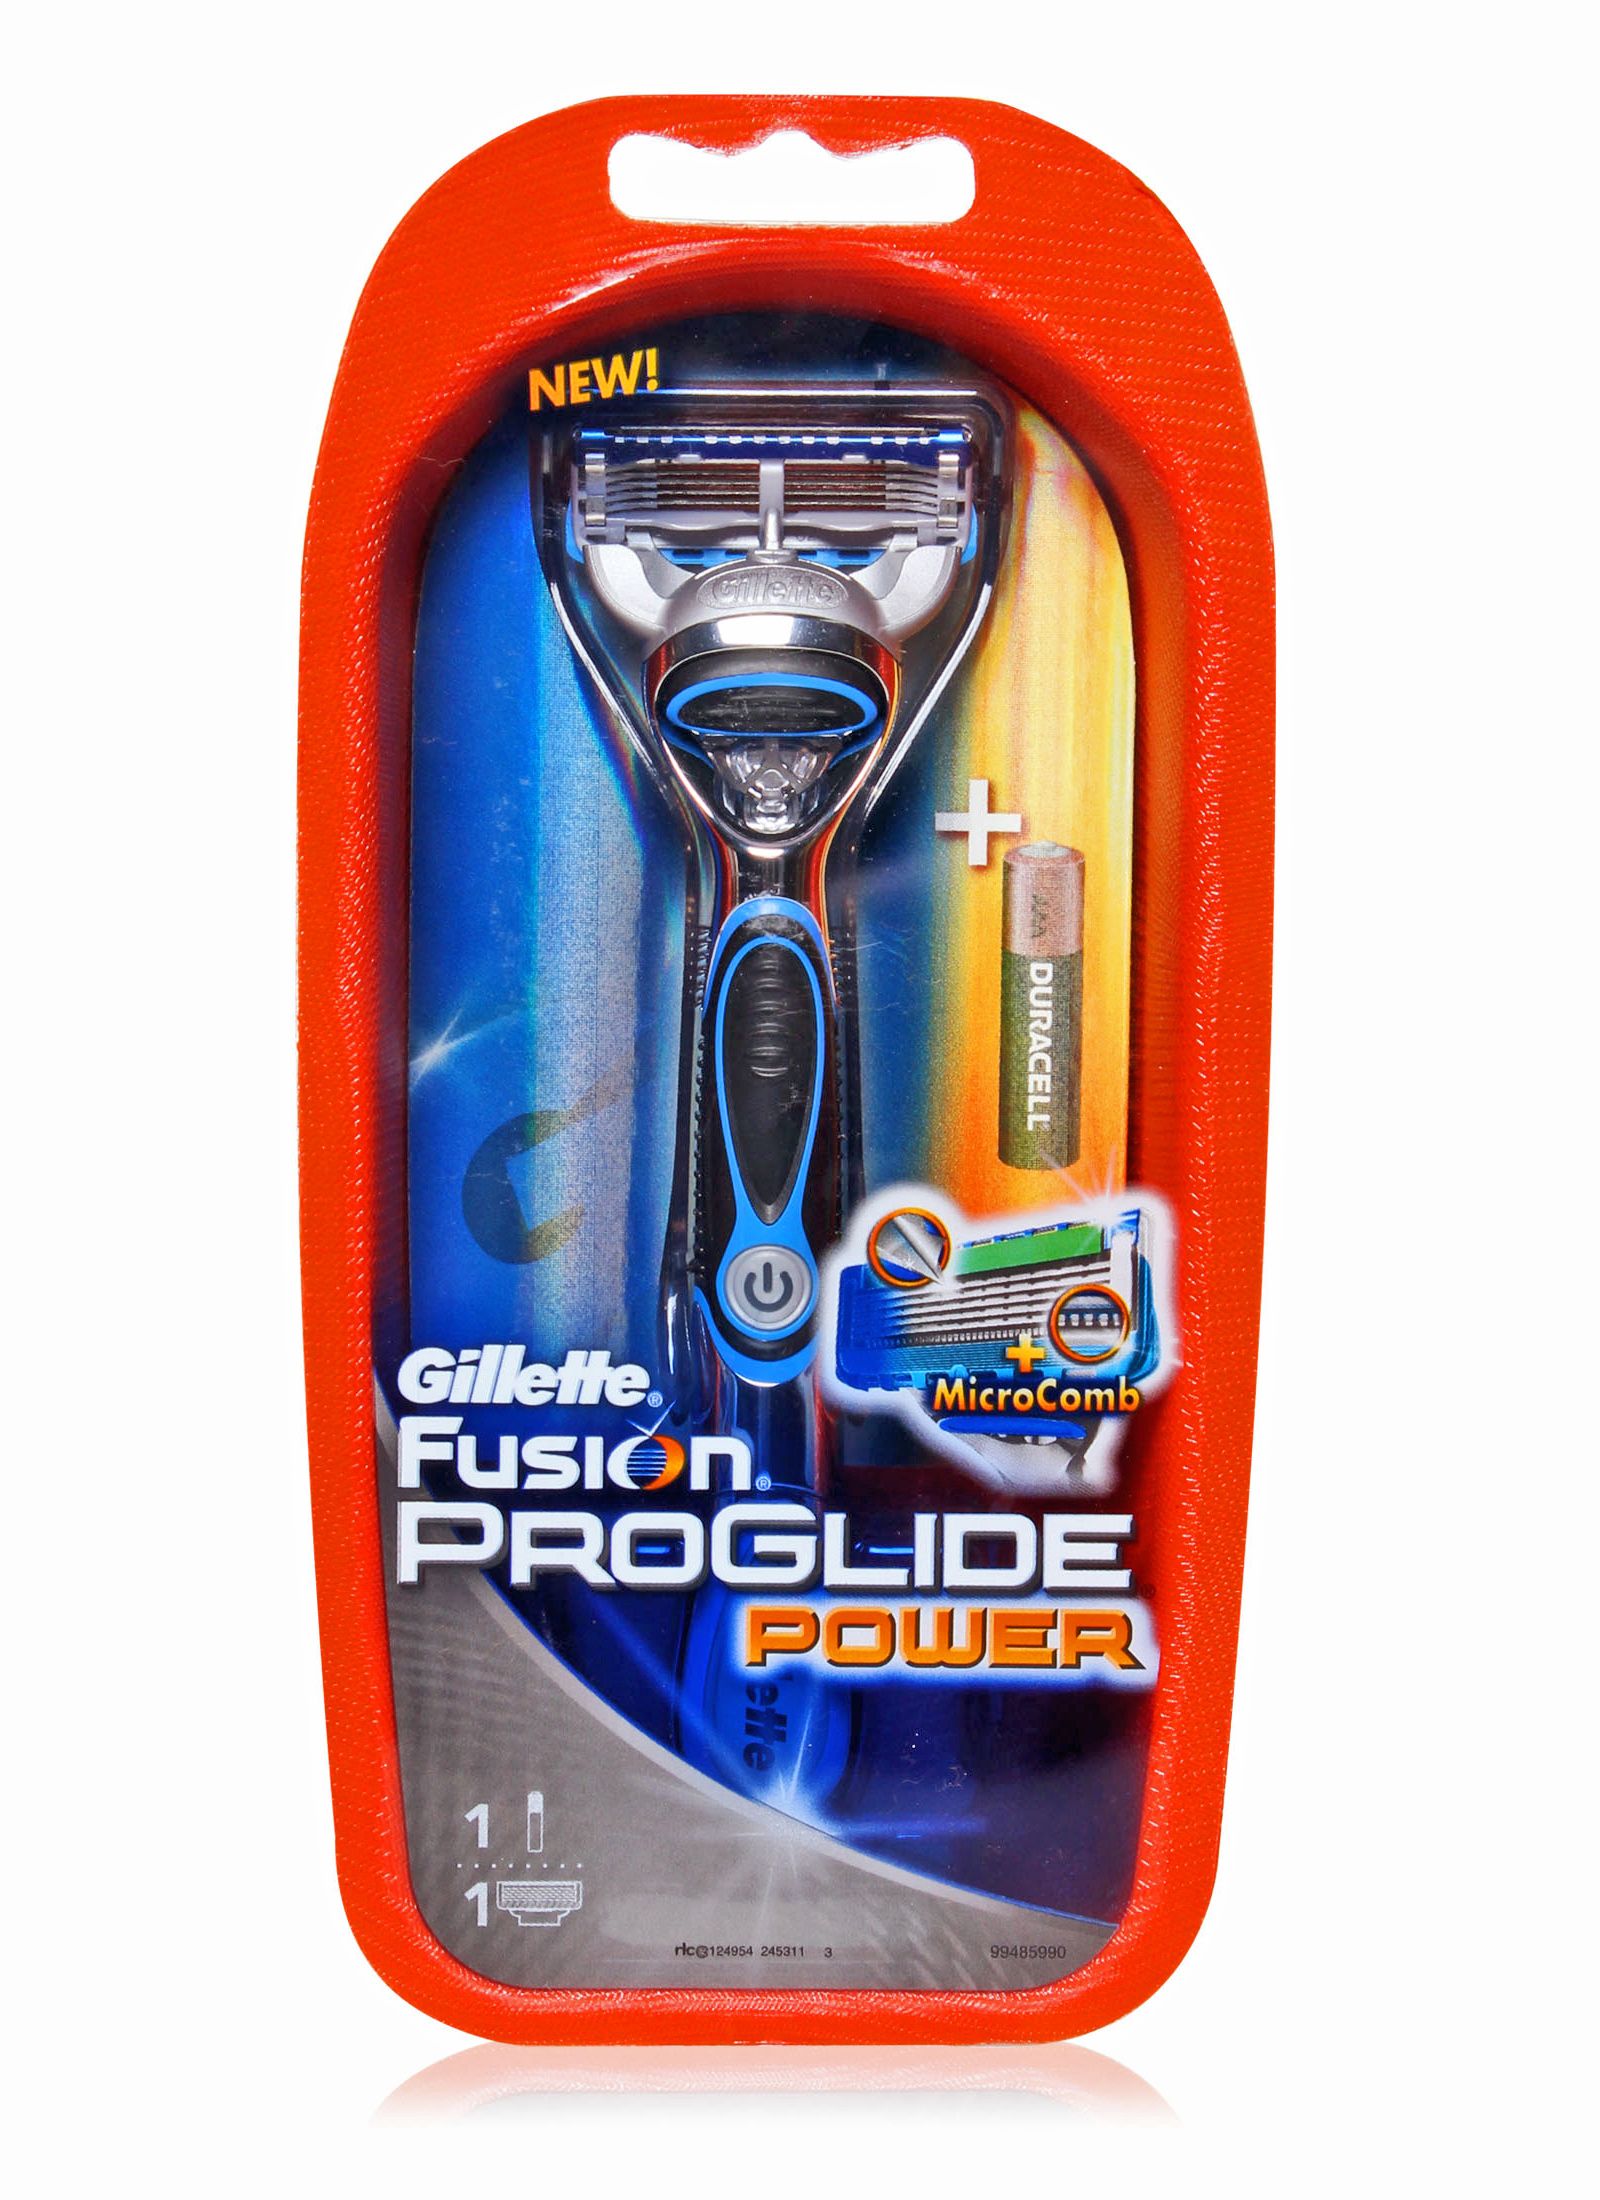 zwavel Stamboom Of Gillette Fusion ProGlide Power Highest Rated Reviews Page 4 of 6 | SheSpeaks